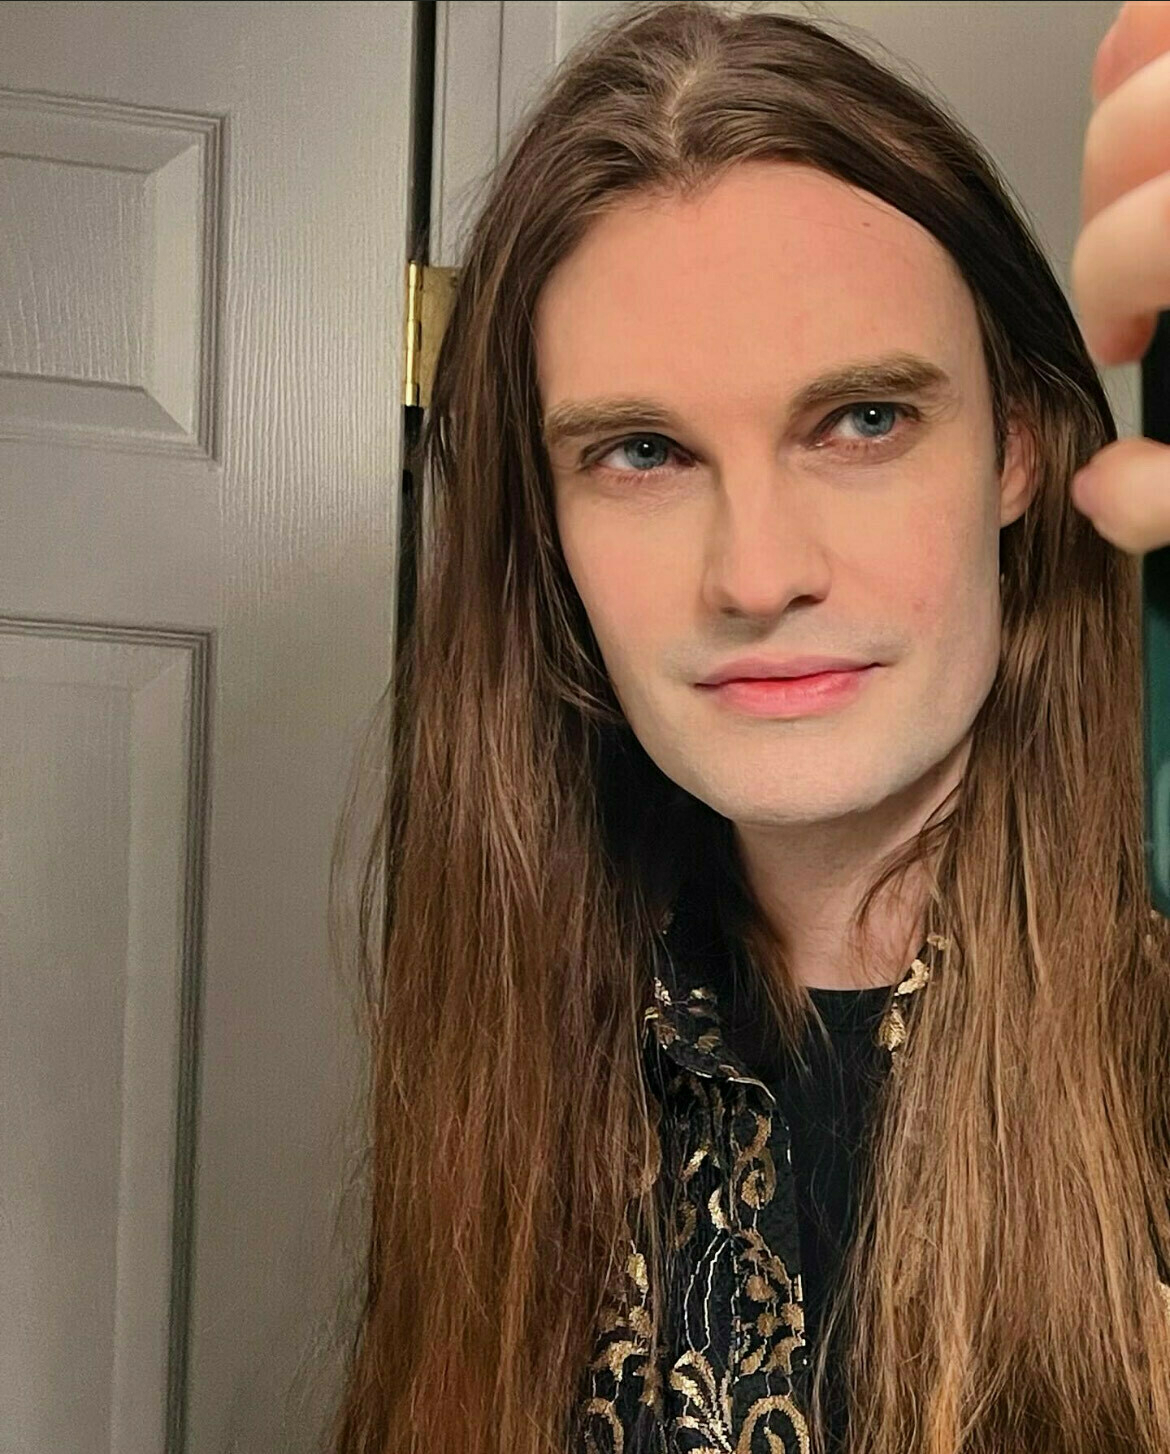 An androgynous white person with long brown hair and blue eyes takes a selfie.